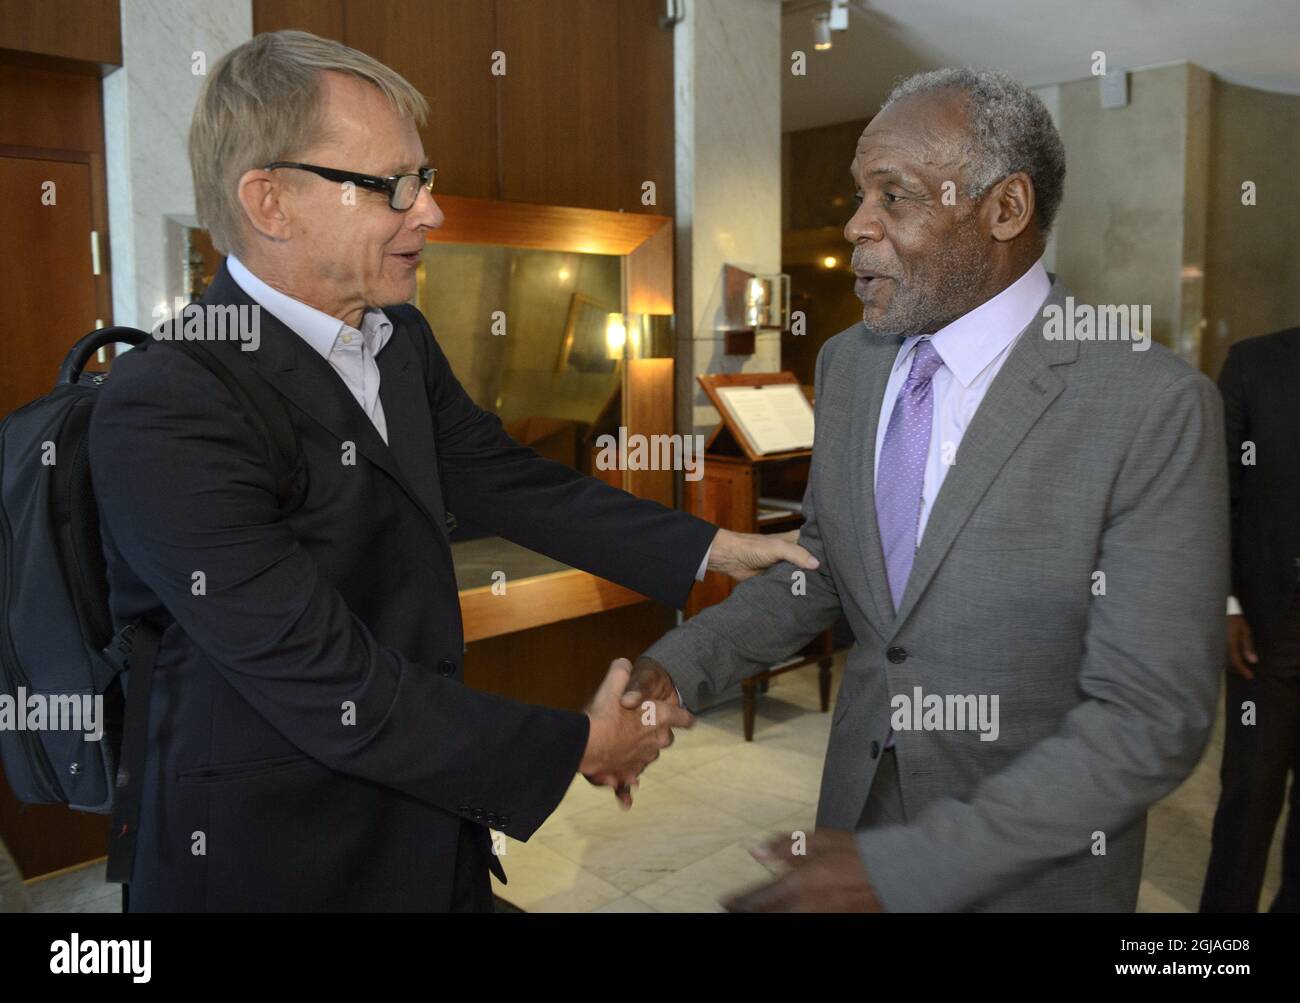 ** Swedish Professor Hans Rosling is dead at 68 ** STOCKHOLM 2015-09-07 Swedish Professor Hans Rosling meets with US actor Danny Glover at a fund raising event for the UNHCR at the Operakallaren restaurant in Stockholm, Sweden, September 7, 2015 Rosling has gone viral with videos criticizing politicians and journalists on the current refugee situation. Danny Clover in known from the 'Lethal Weapon' movies Foto: Henrik Montgomery / TT / kod 10060  Stock Photo